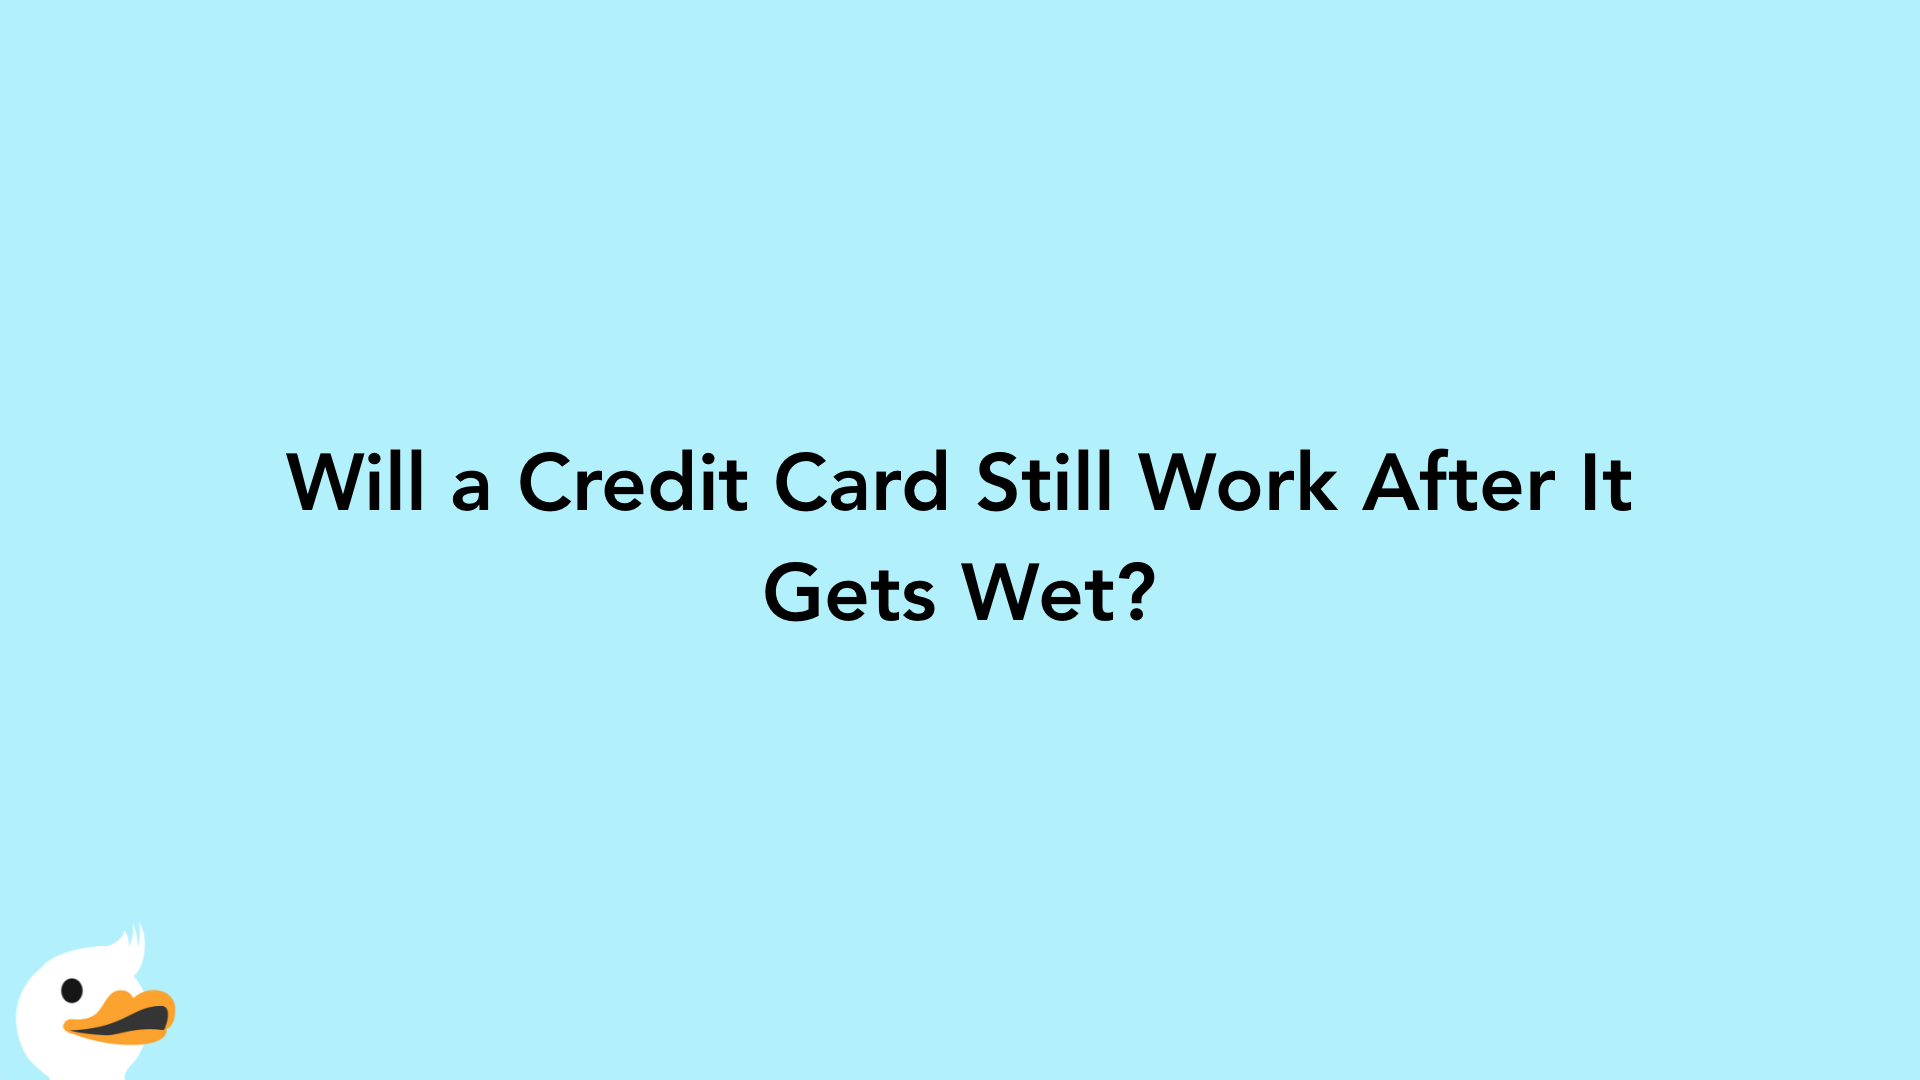 Will a Credit Card Still Work After It Gets Wet?